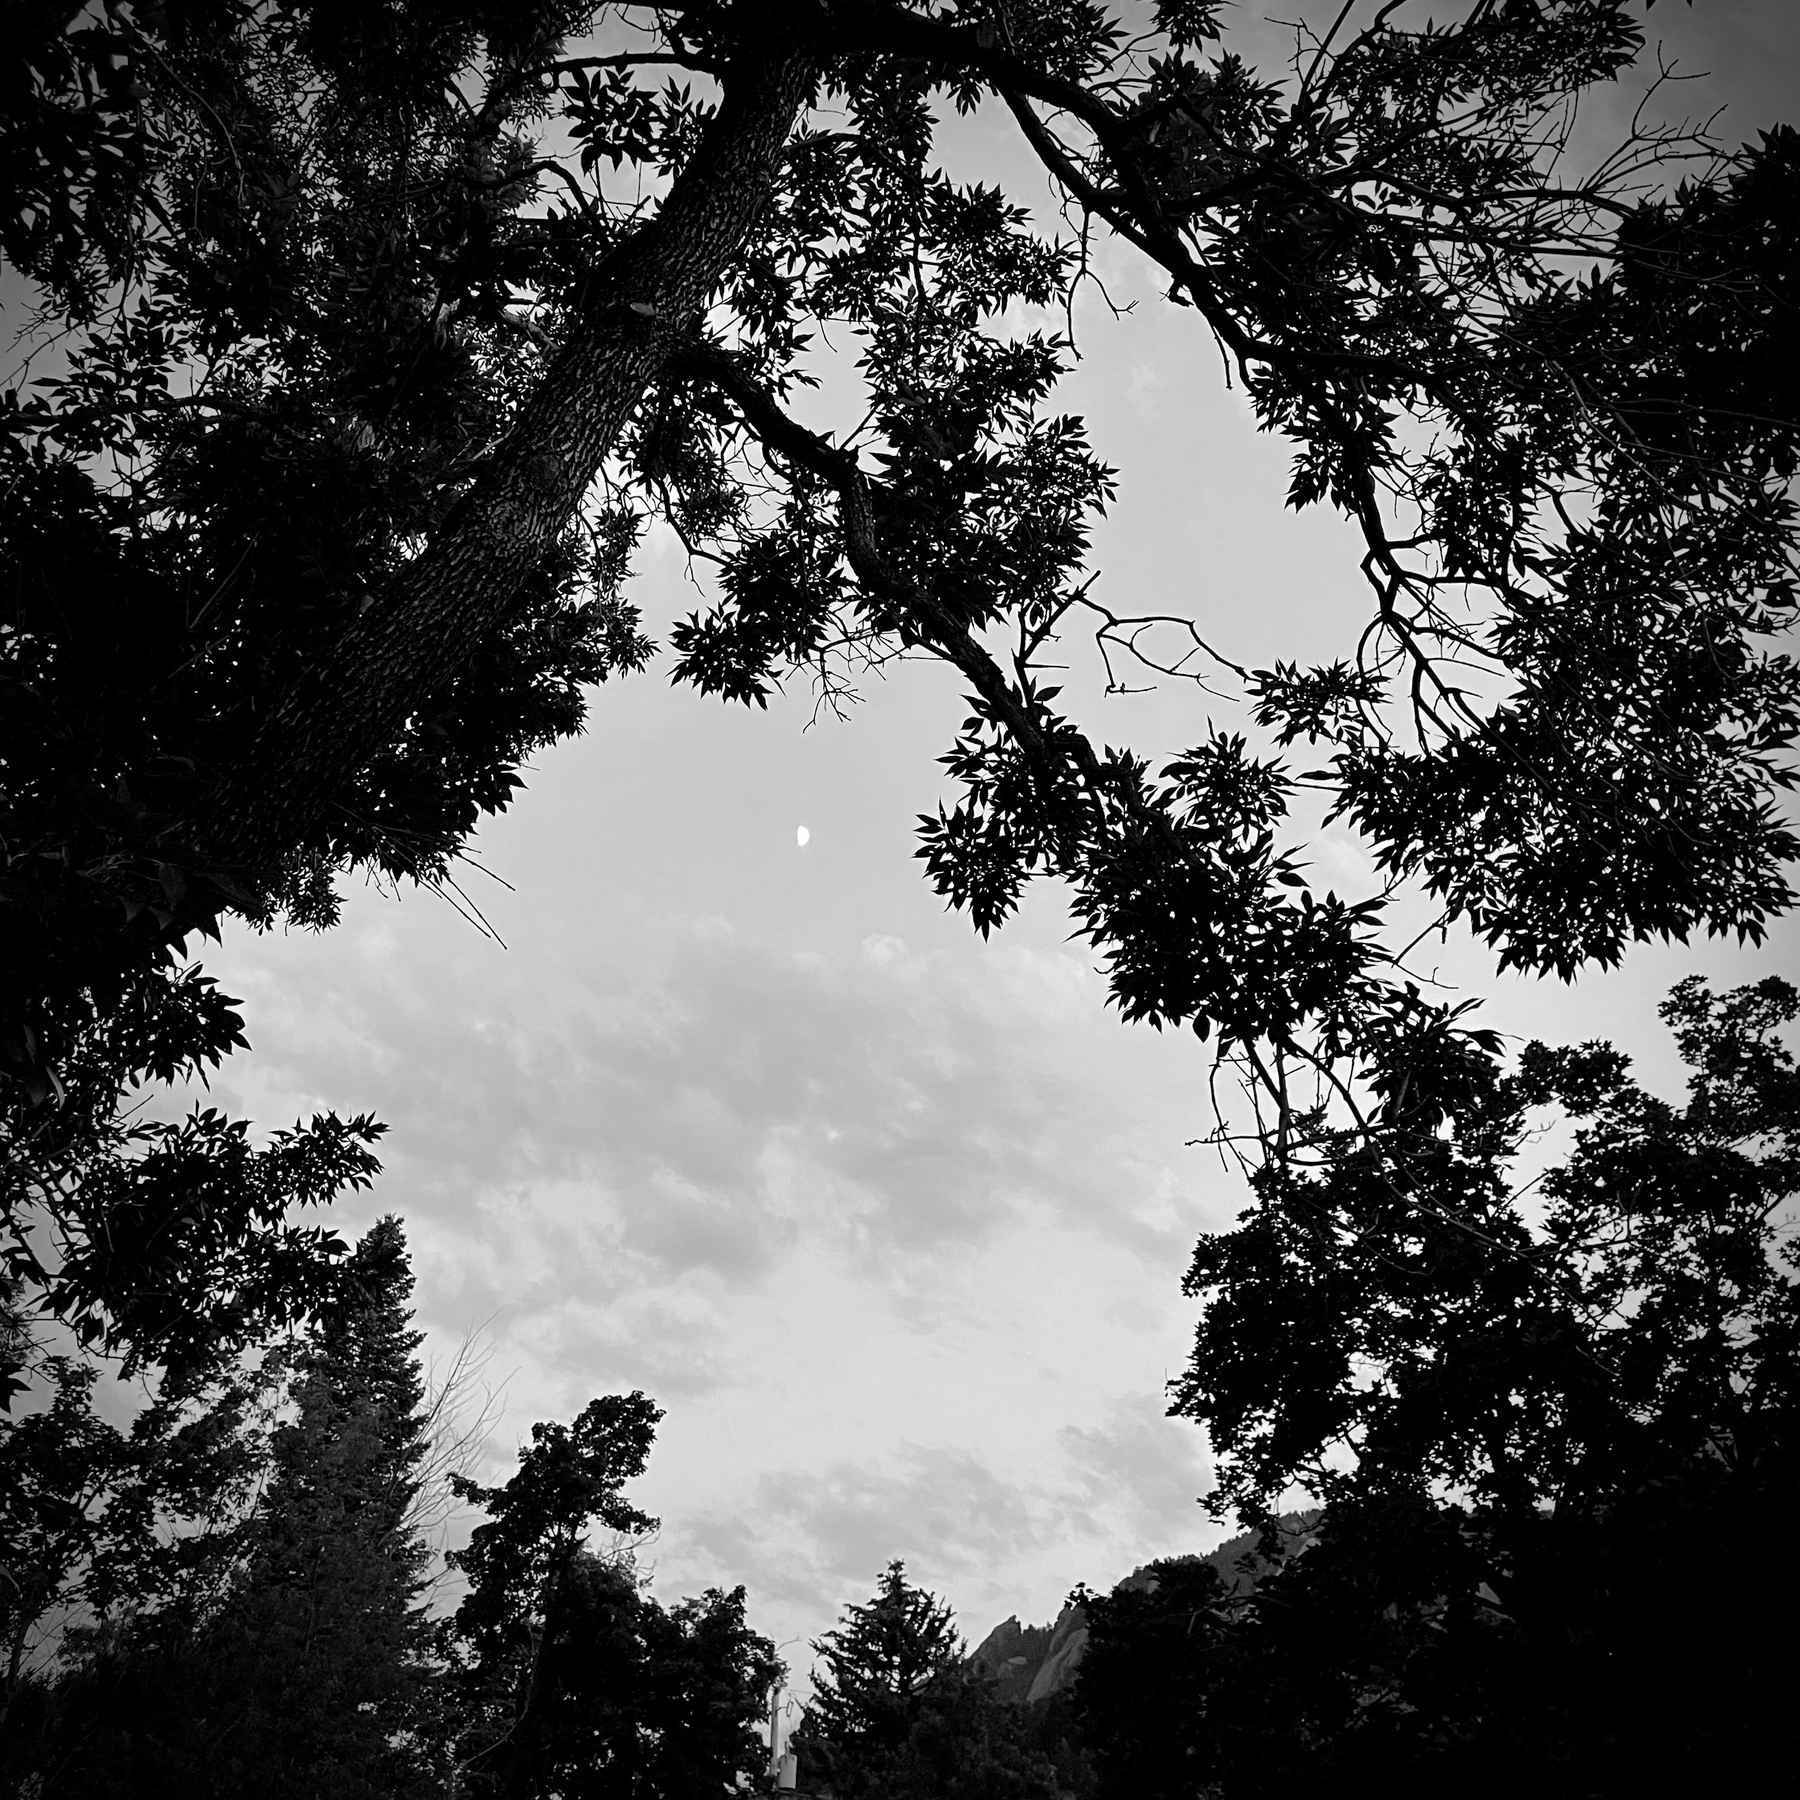 Evening trees before a cloudy sky, black and white.